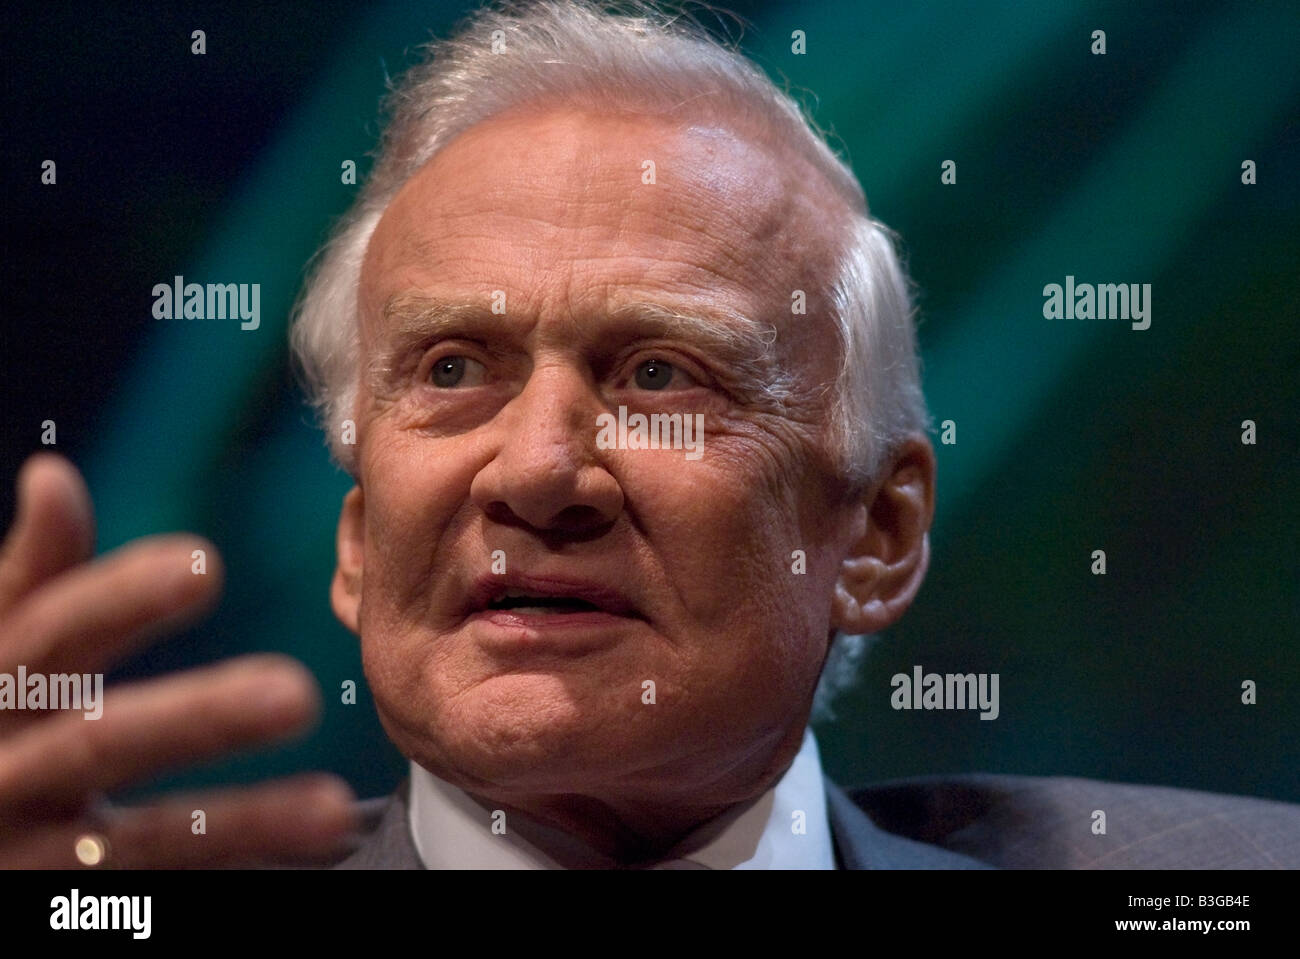 Astronaut Buzz Aldrin, who walked on the moon in 1969 during the Apollo 11 space mission, talking during a conference in 2008 Stock Photo